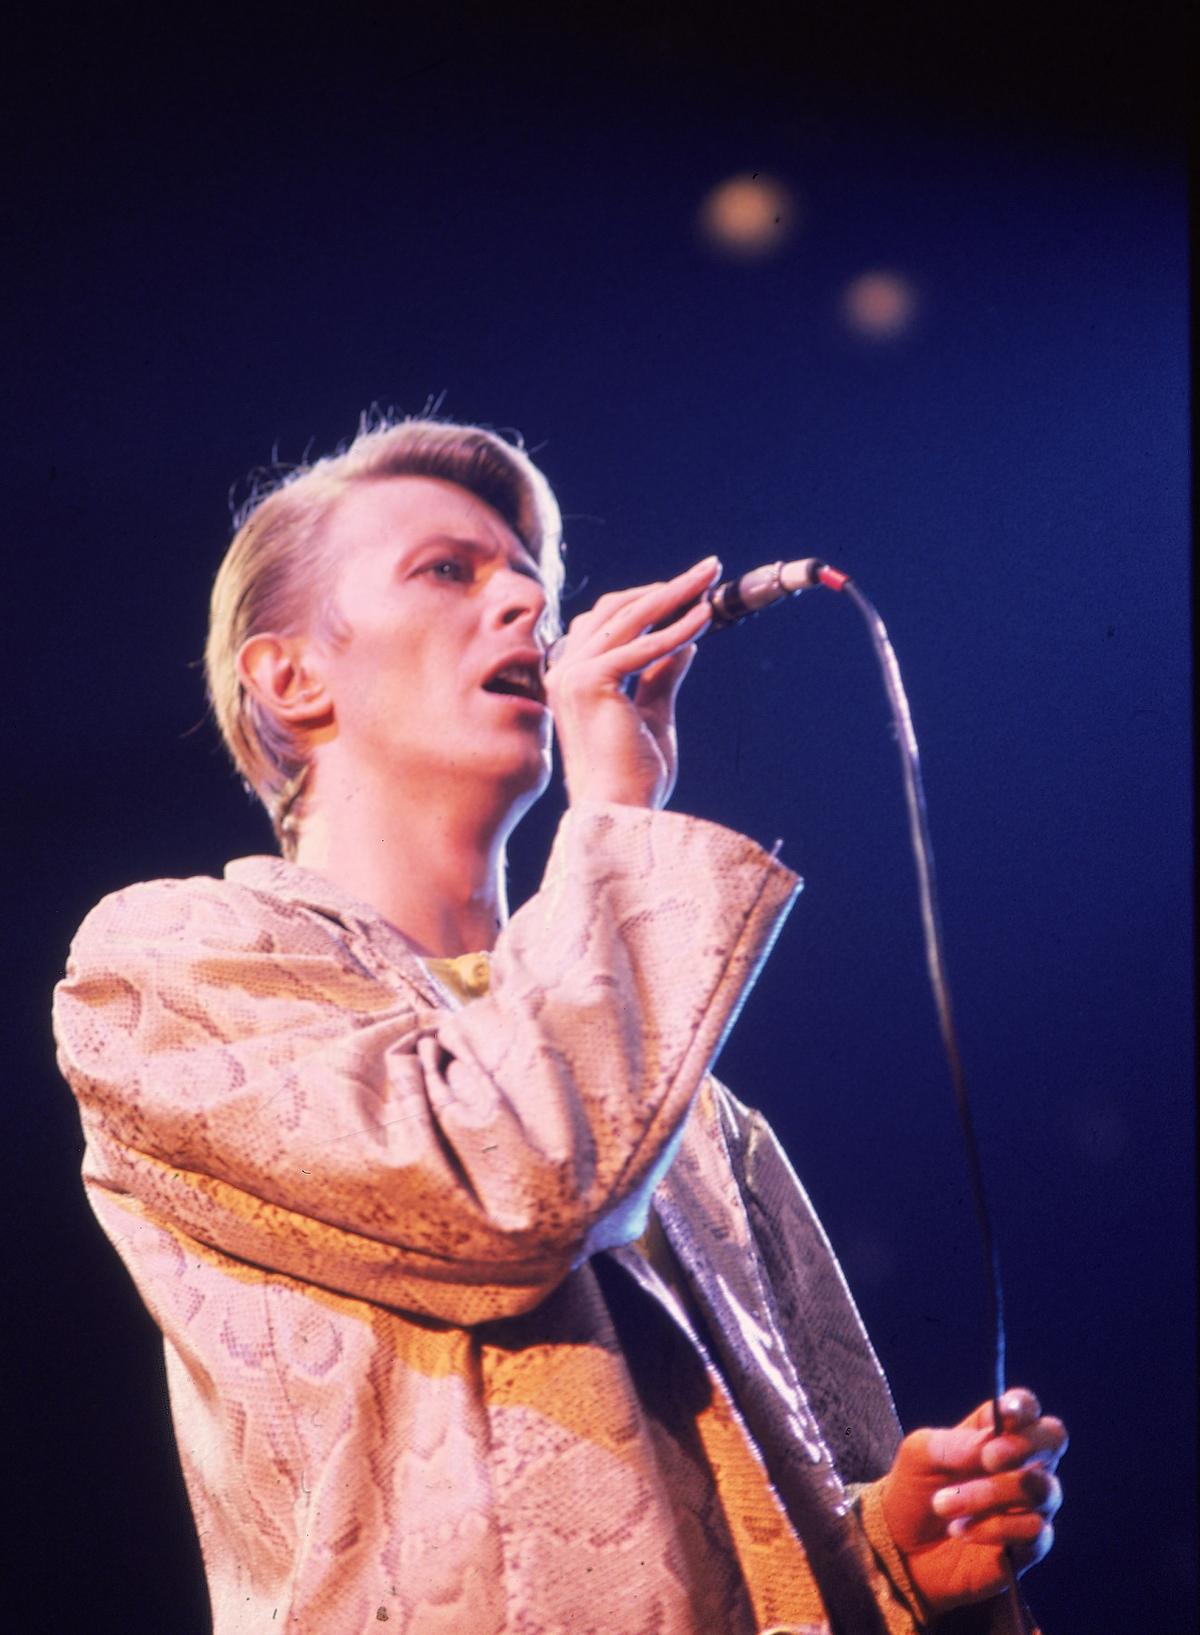 David Bowie at Madison Square Garden in New York in May 1978. (AP Photo/Brian Killigrew)